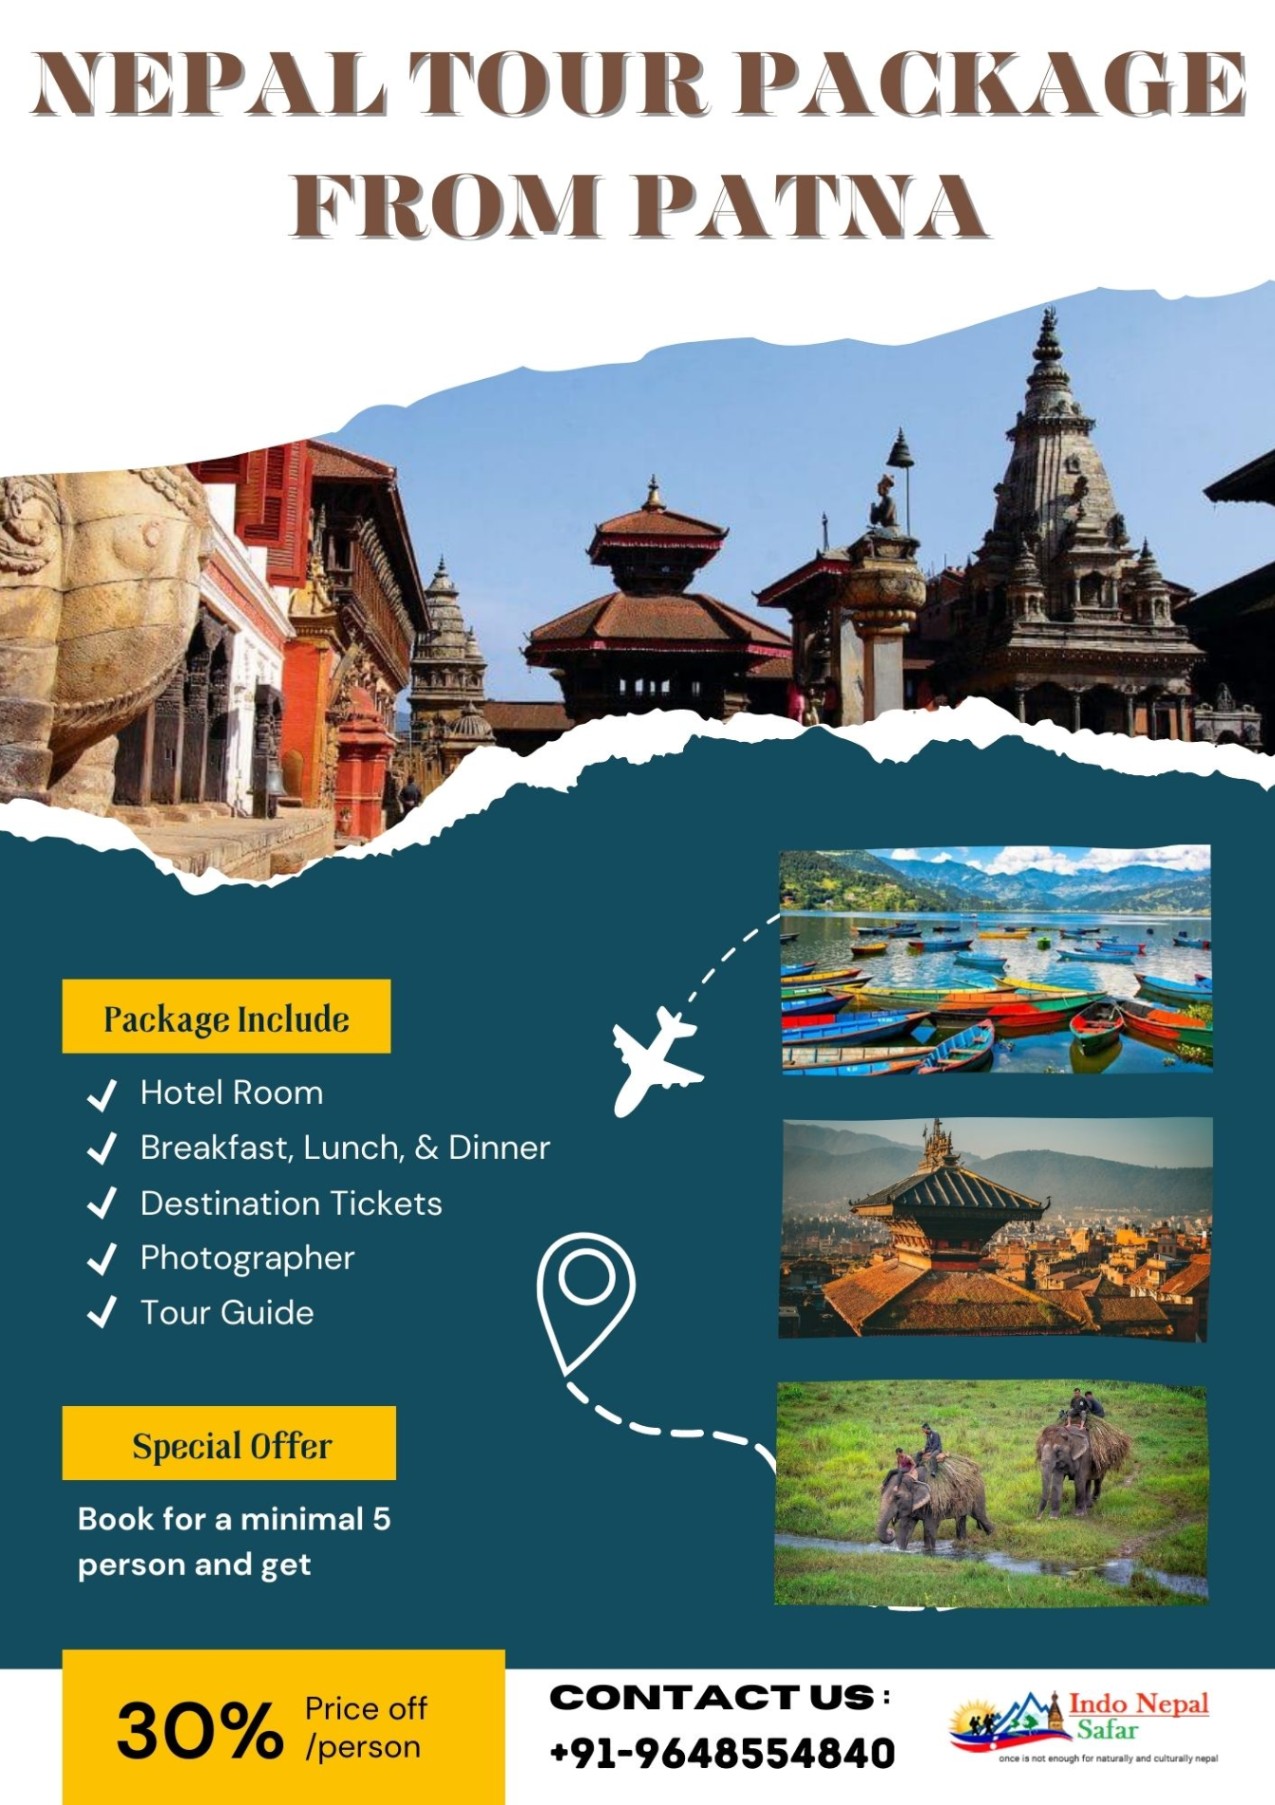 Travel agents; Exp: More than 10 year